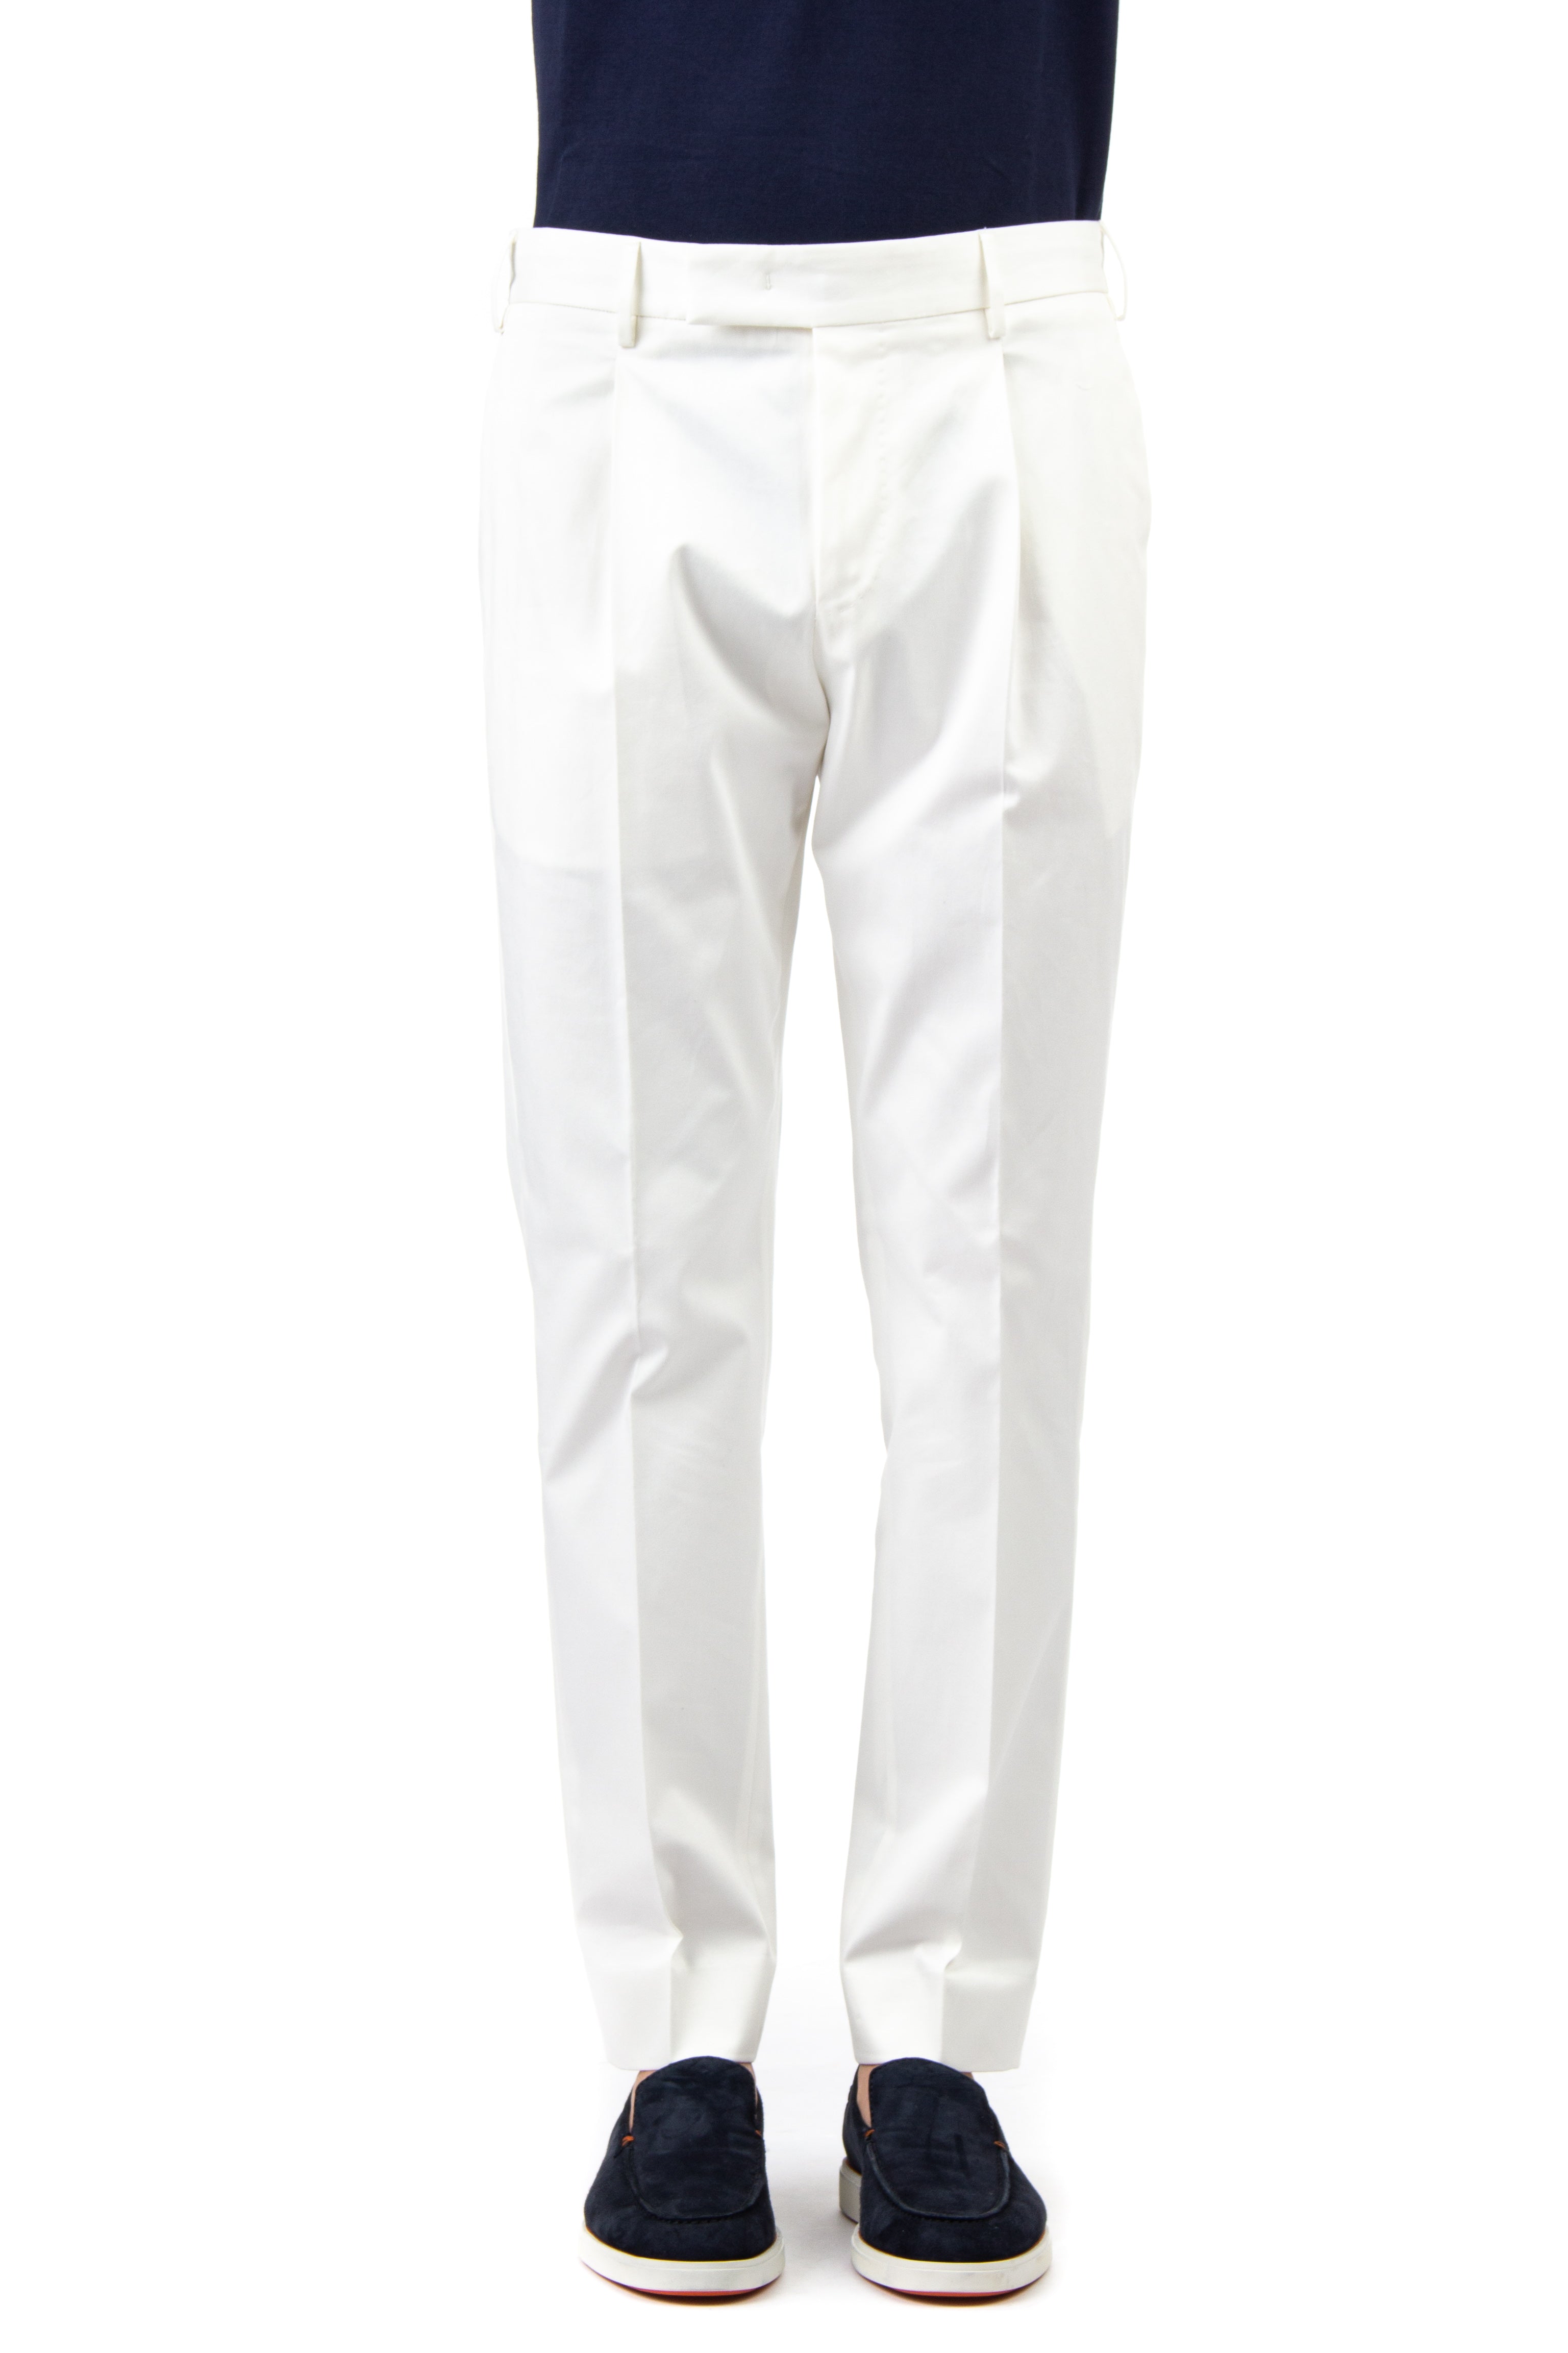 Eleven fit cotton sateen trousers